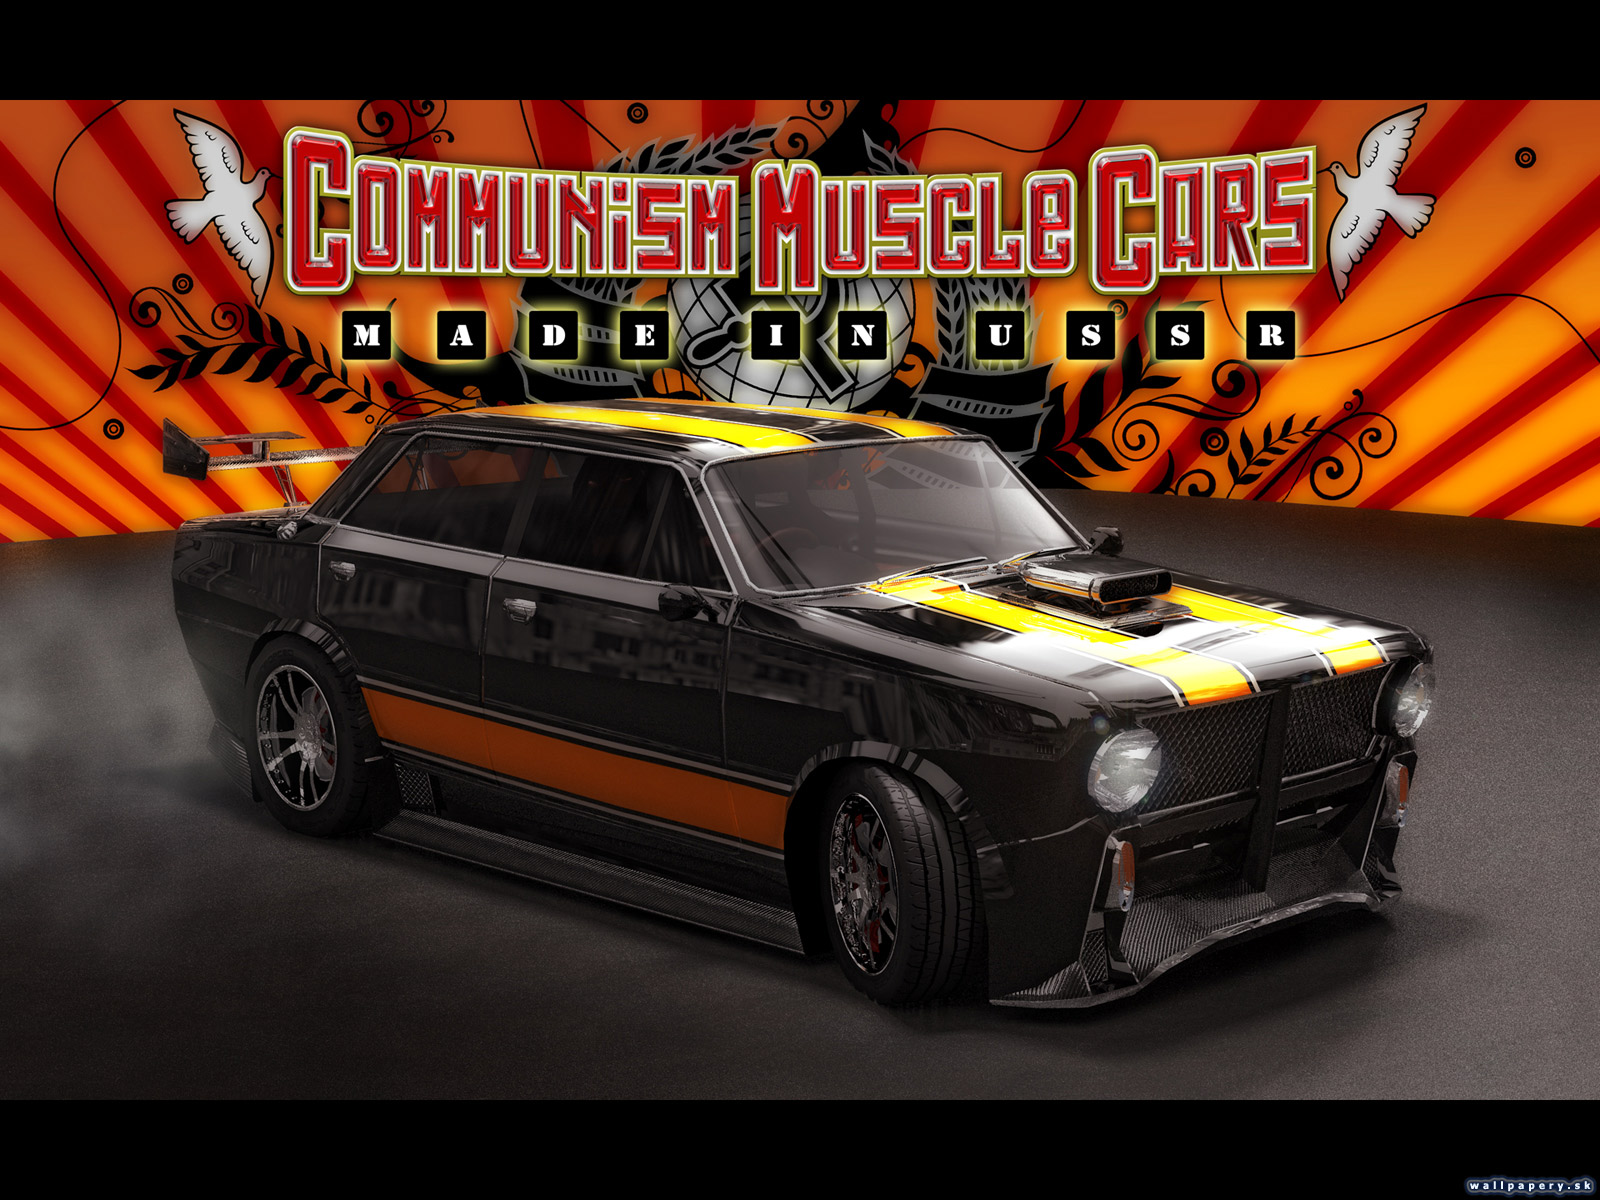 Communism Muscle Cars: Made in USSR - wallpaper 5